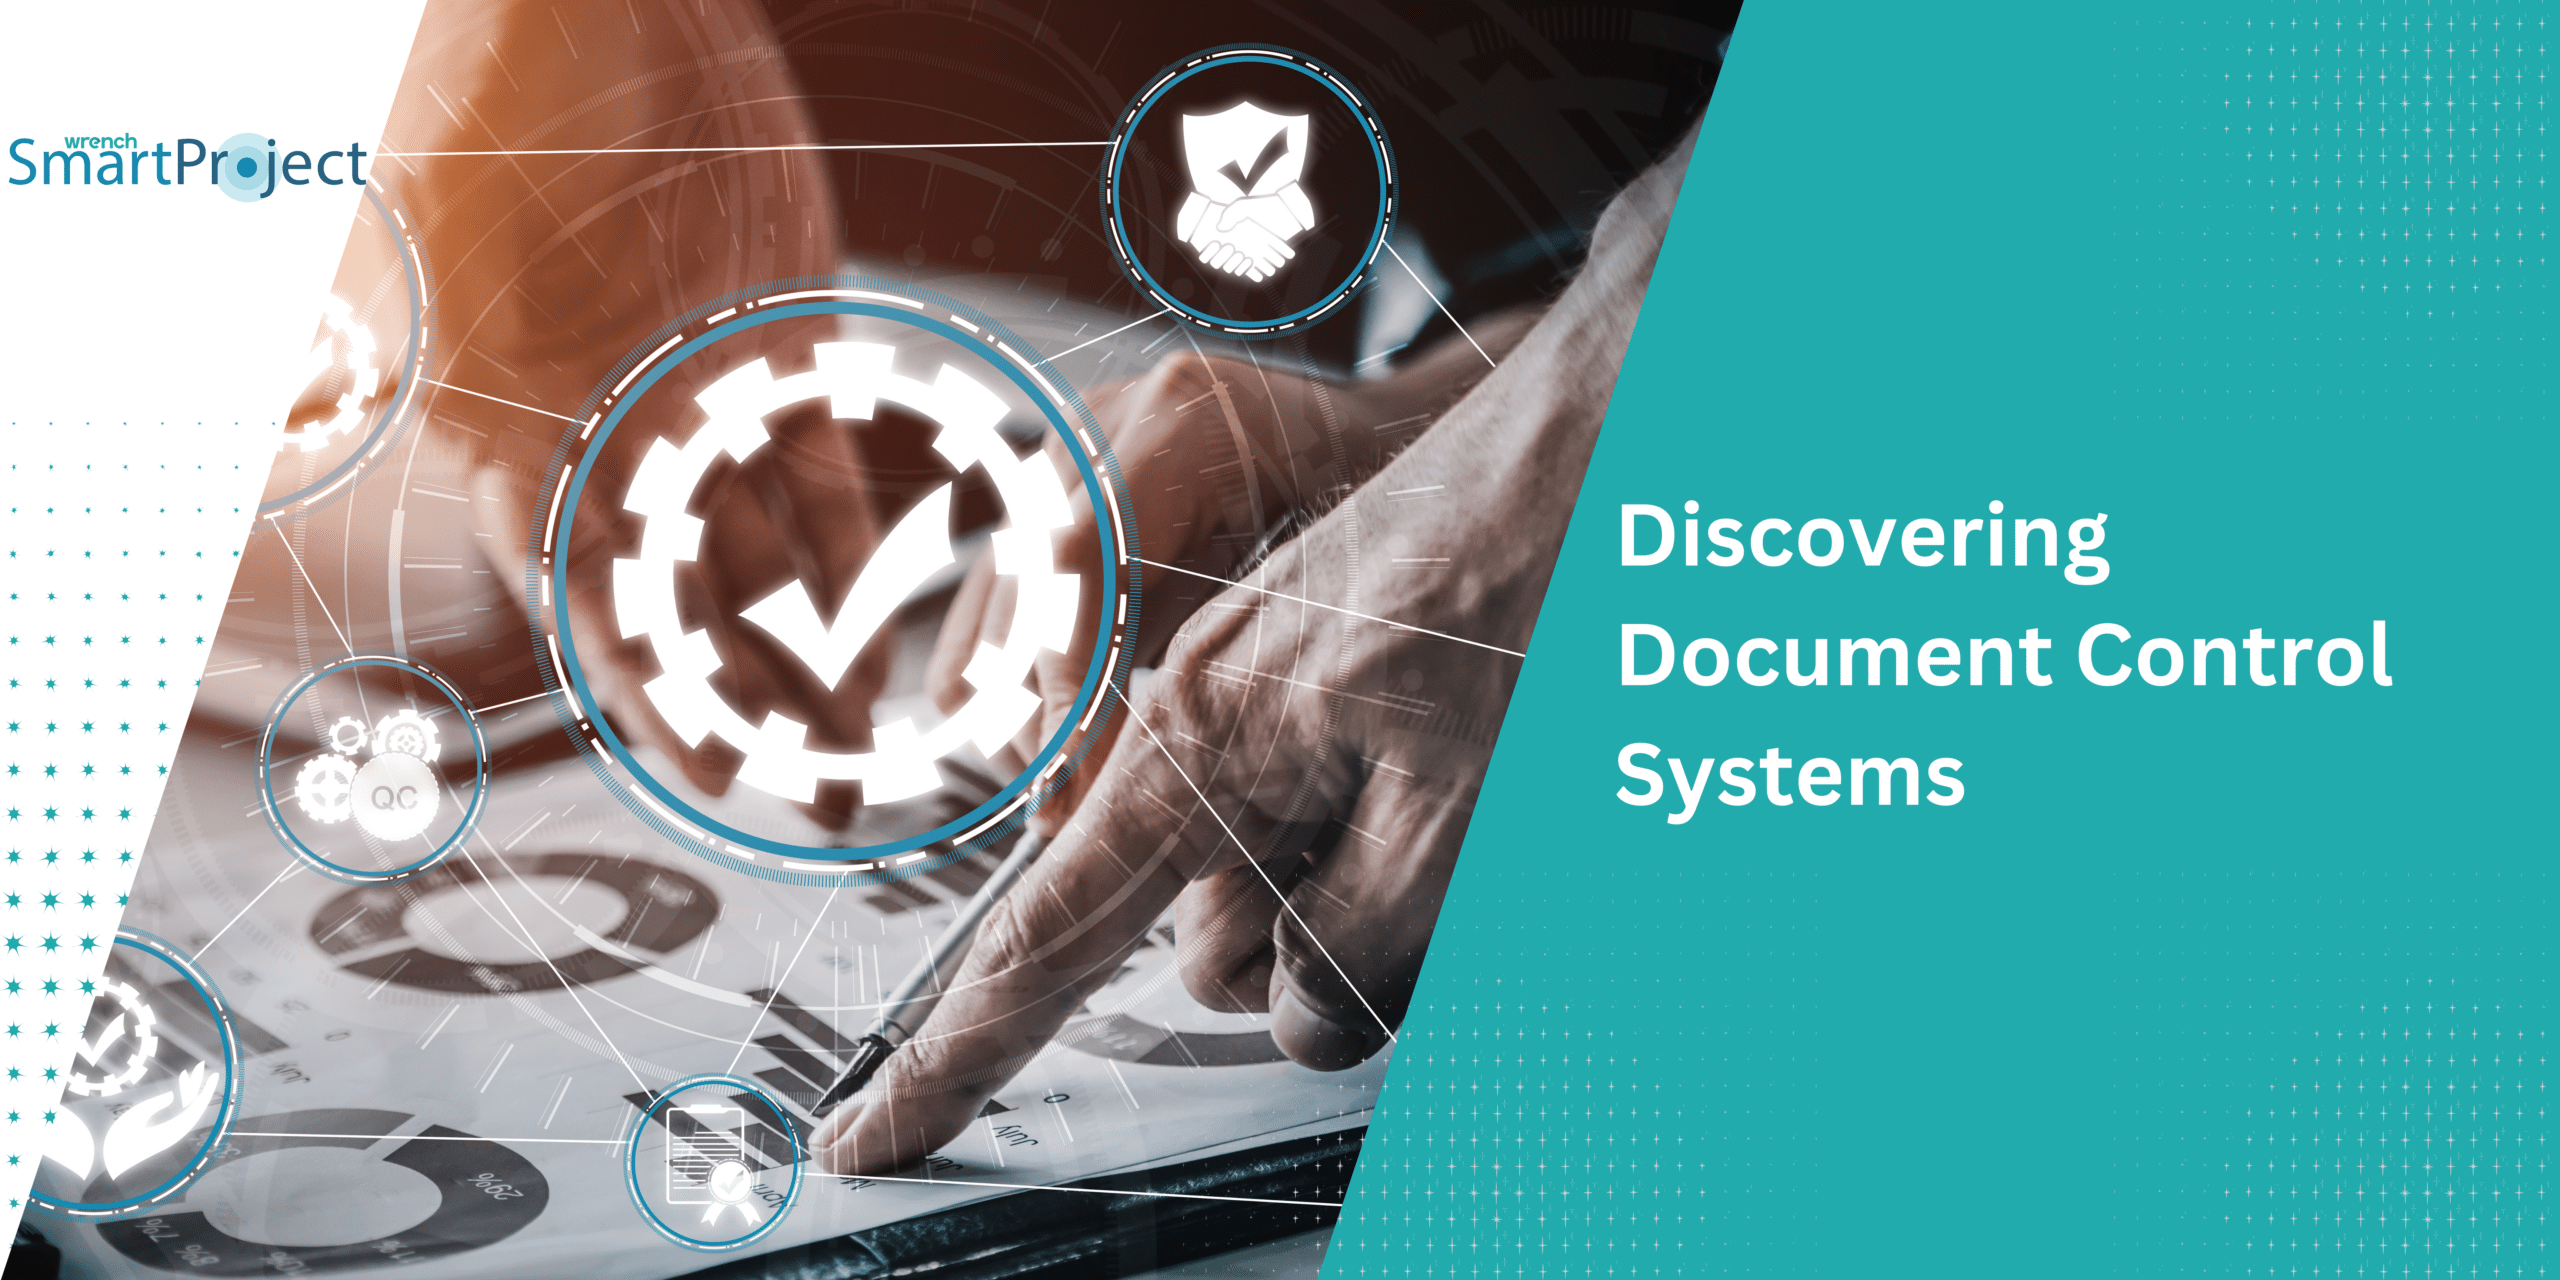 Discovering Document Control Systems